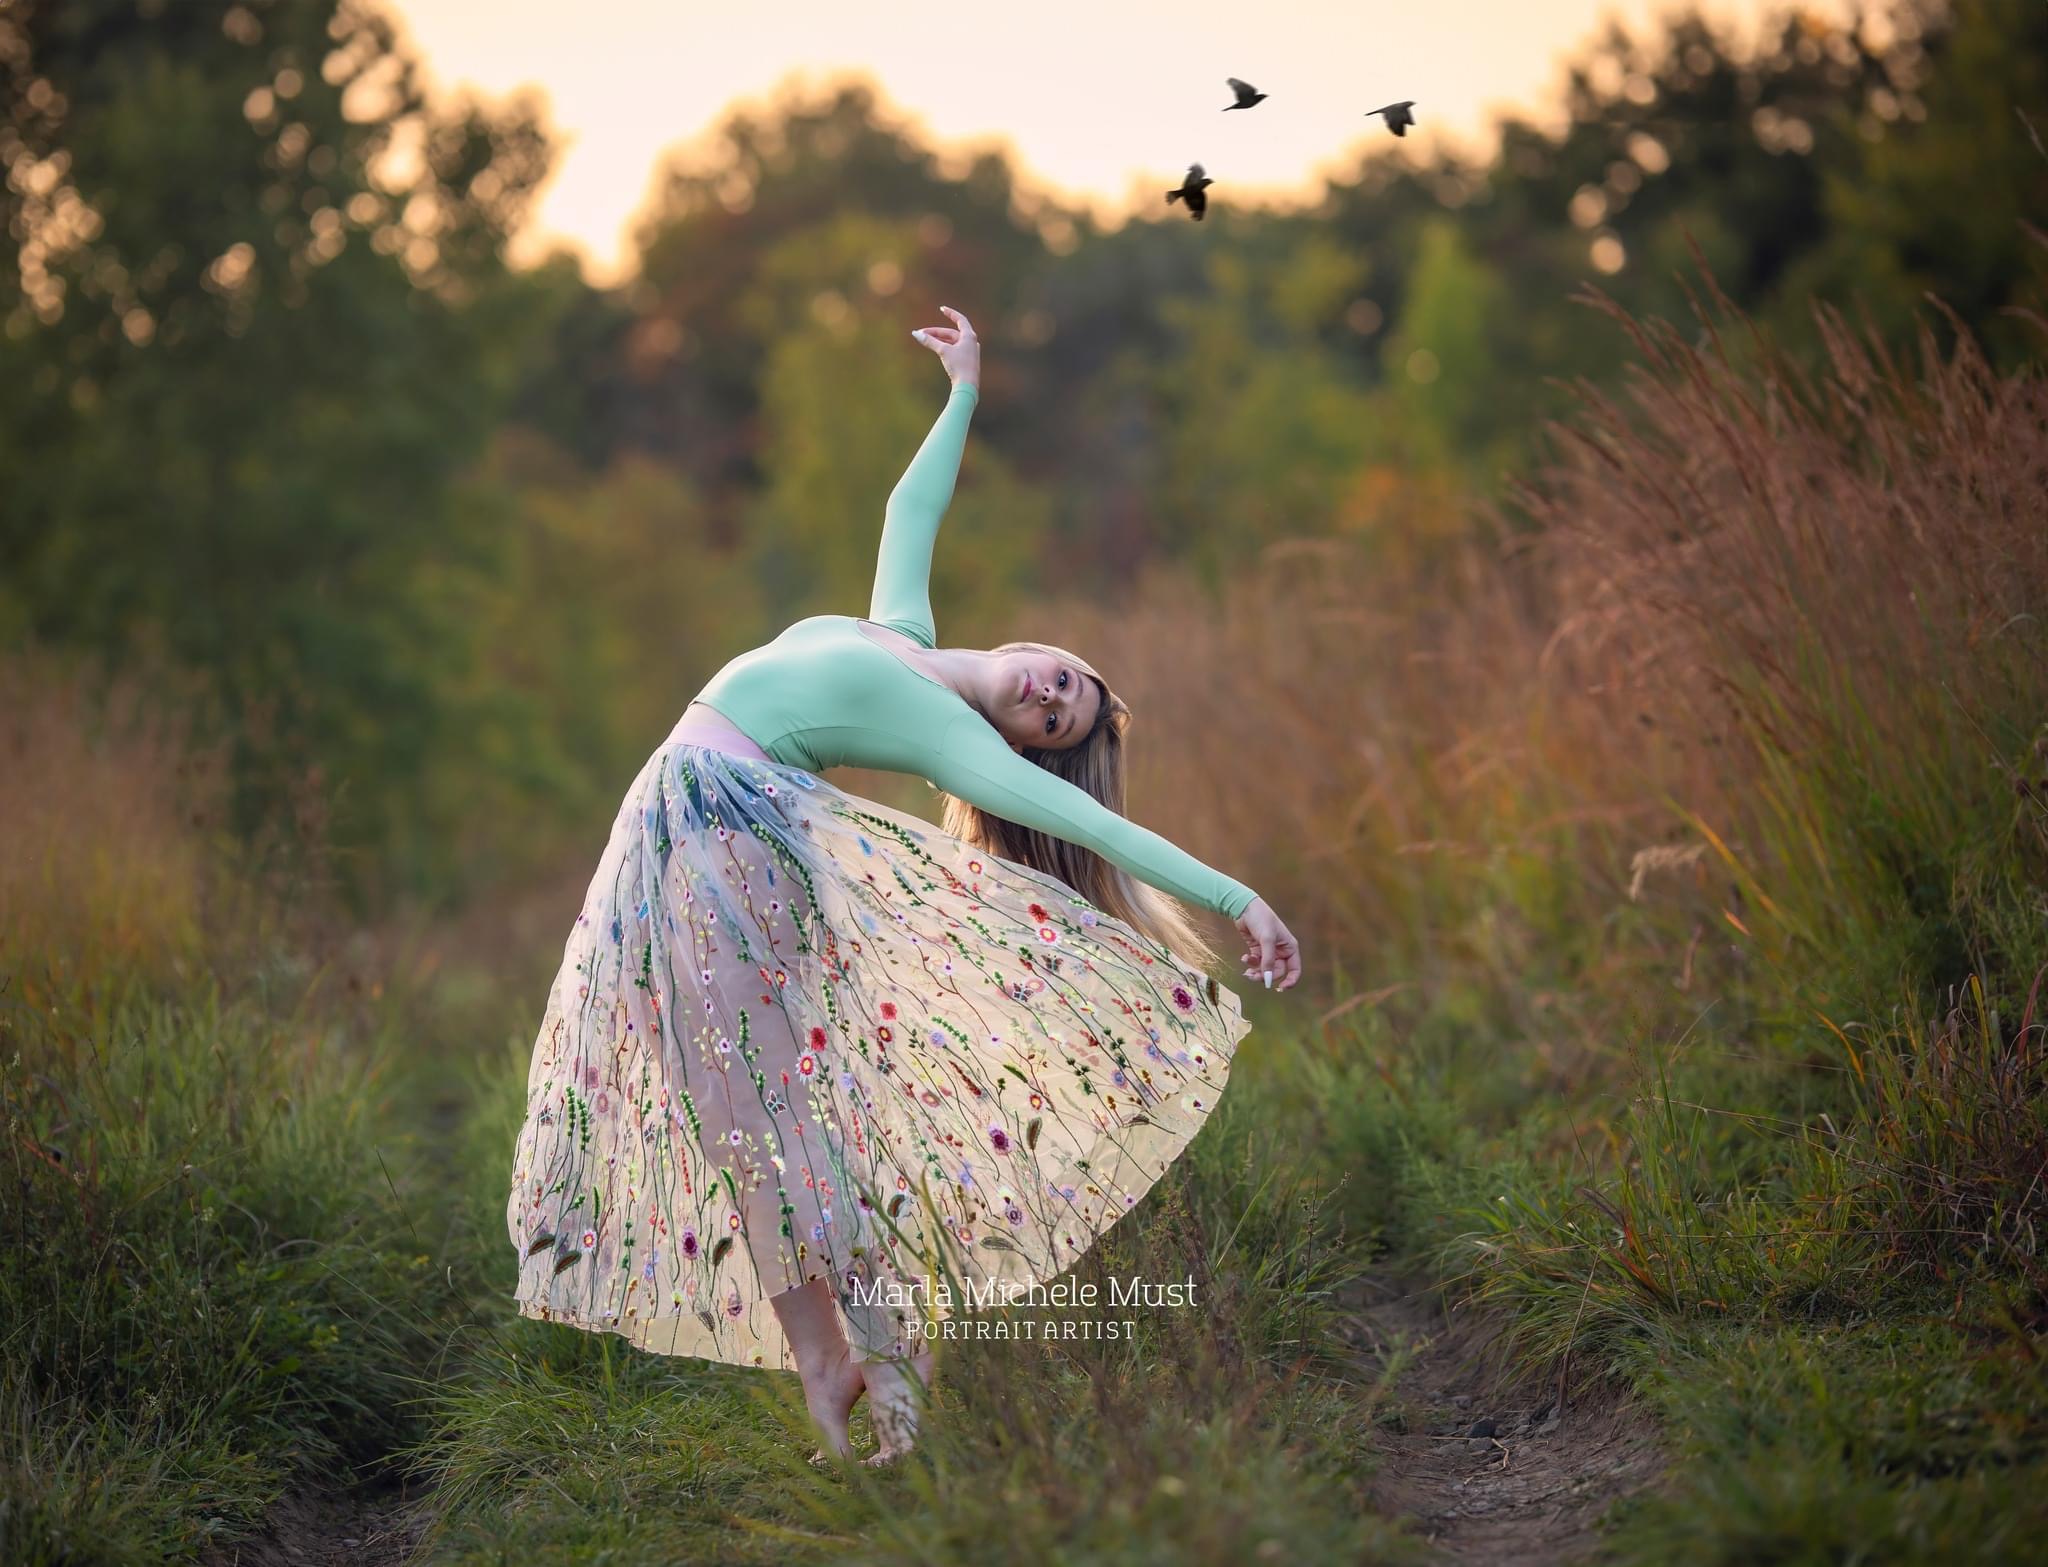 A high school senior strikes a ballerina pose in a field of flowers somewhere in Michigan